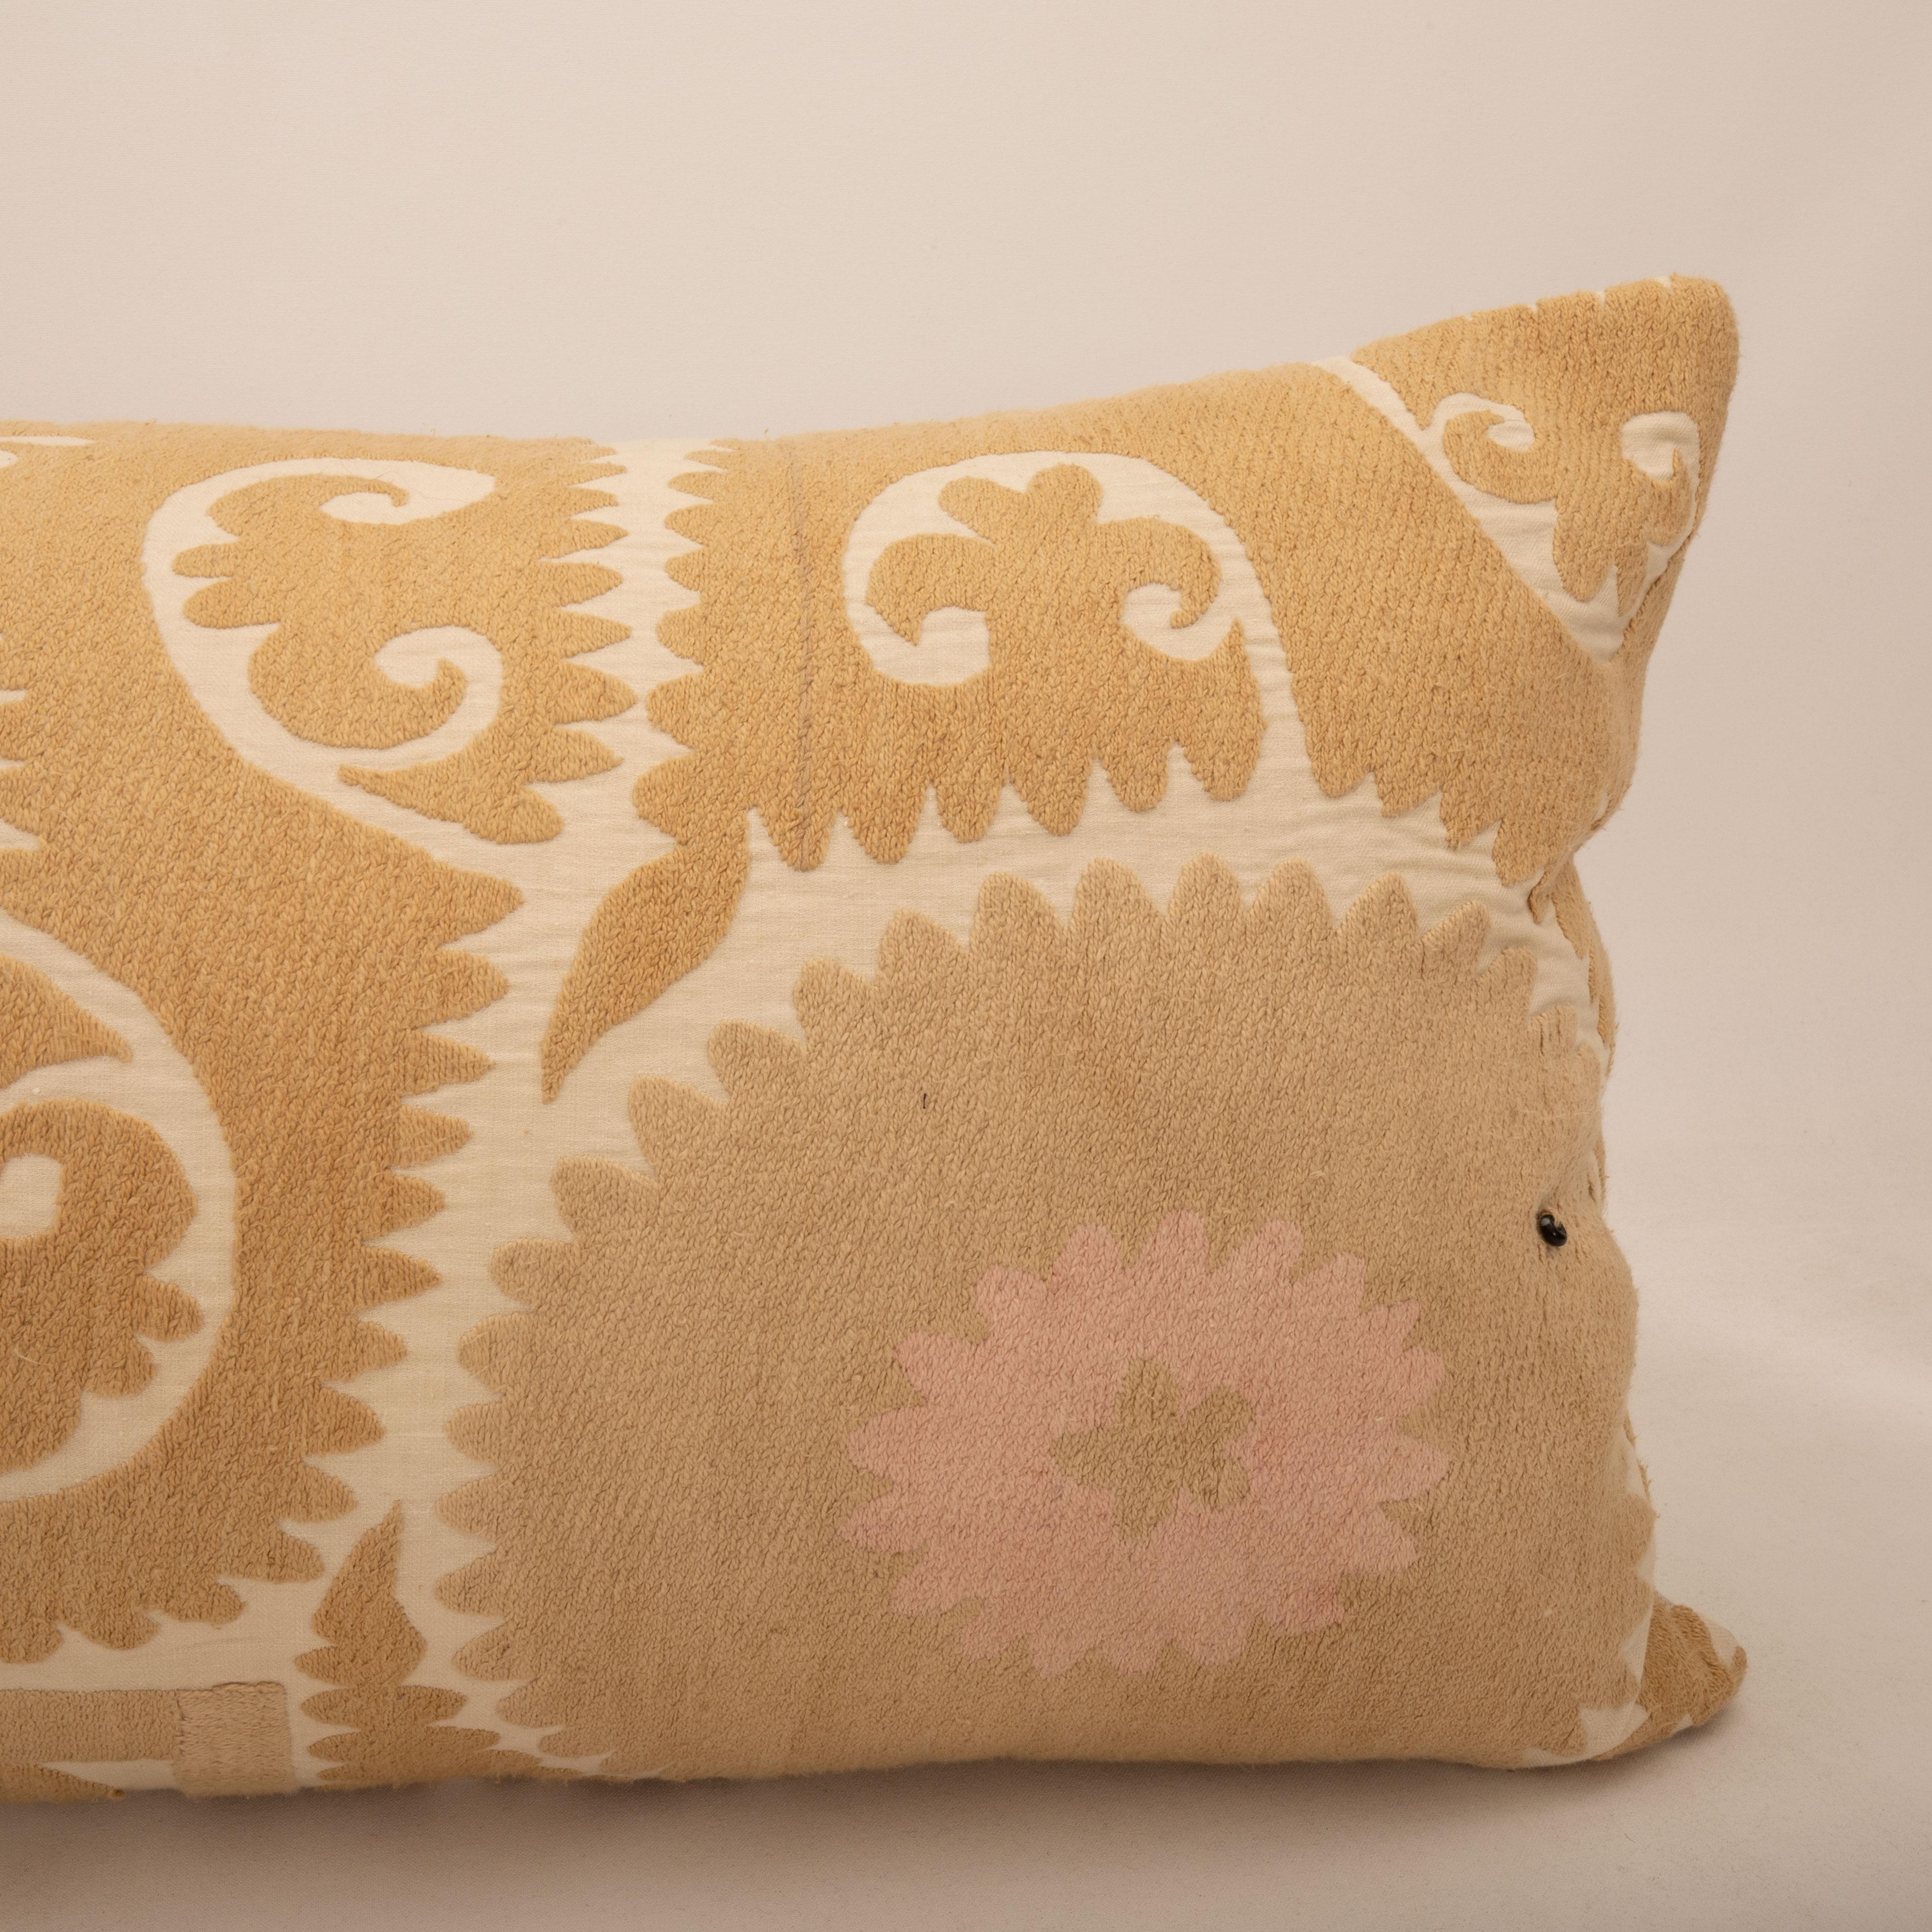 20th Century Pillow Cover Made from a Mid 20th C. Suzani, Uzbekistan For Sale